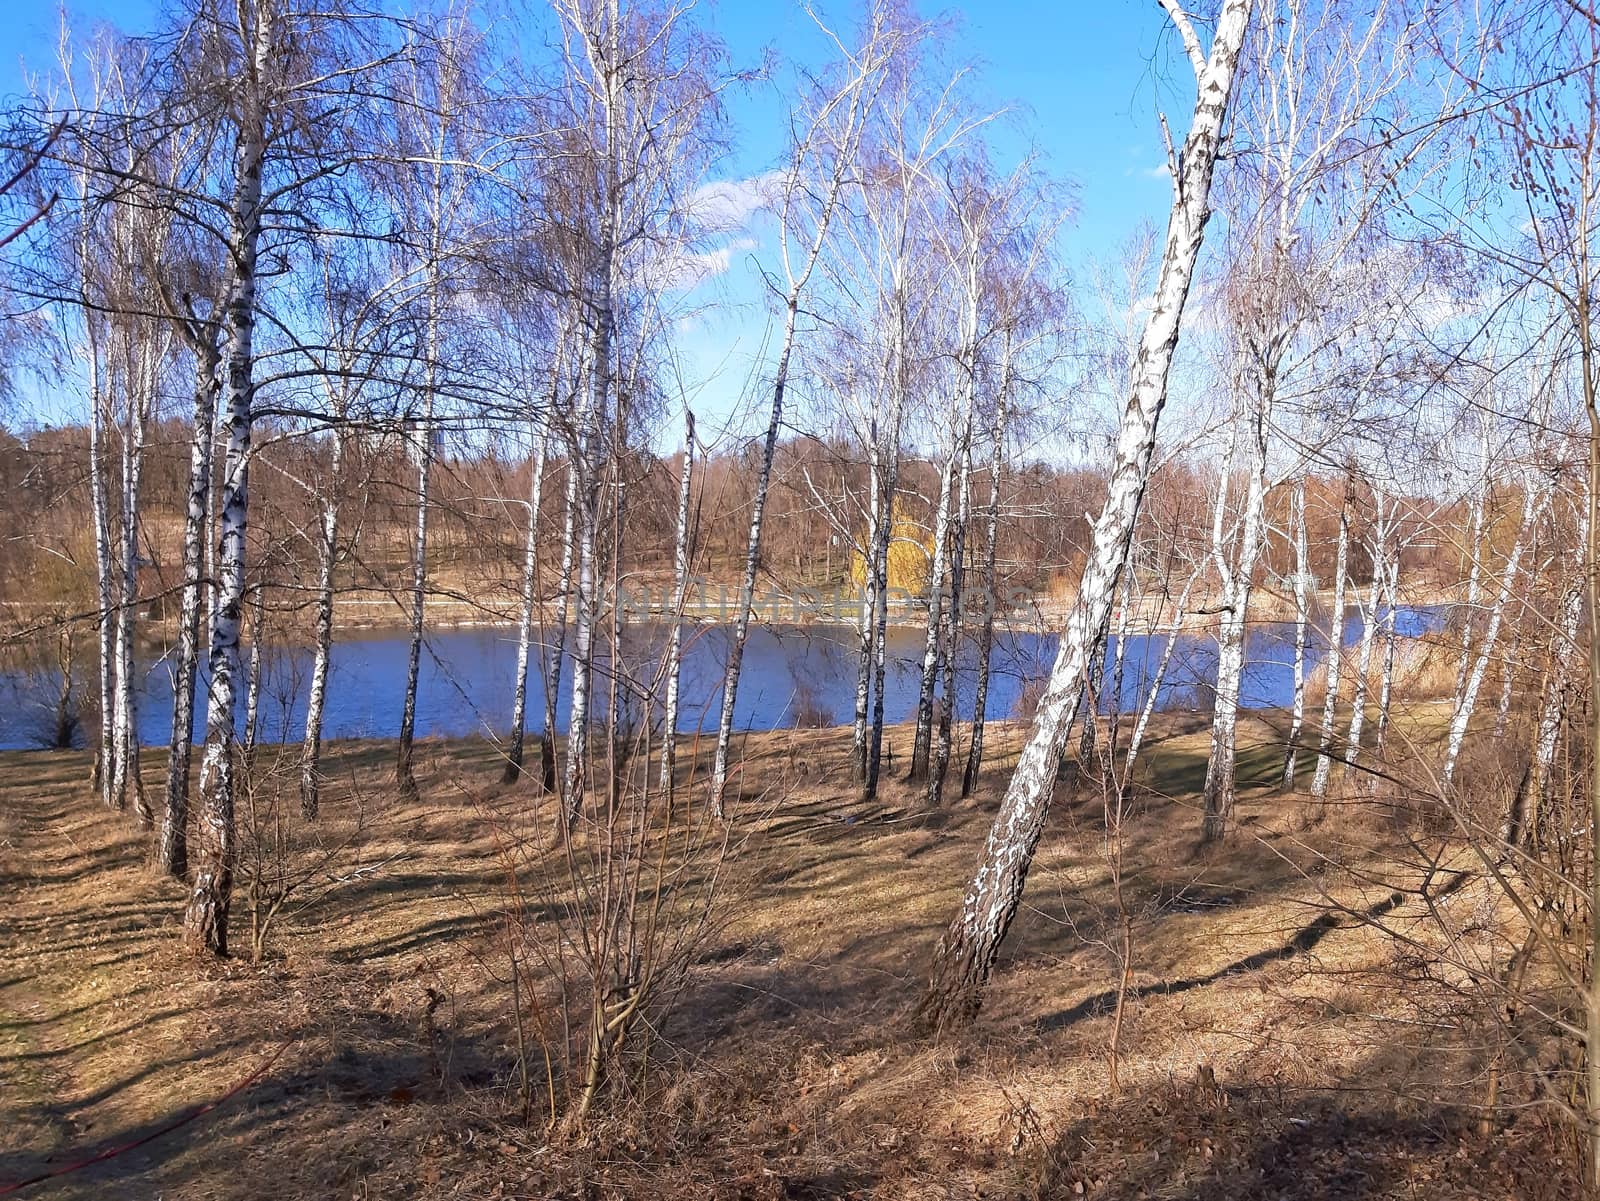 Birch forest in the early spring and behind a lake by Mindru